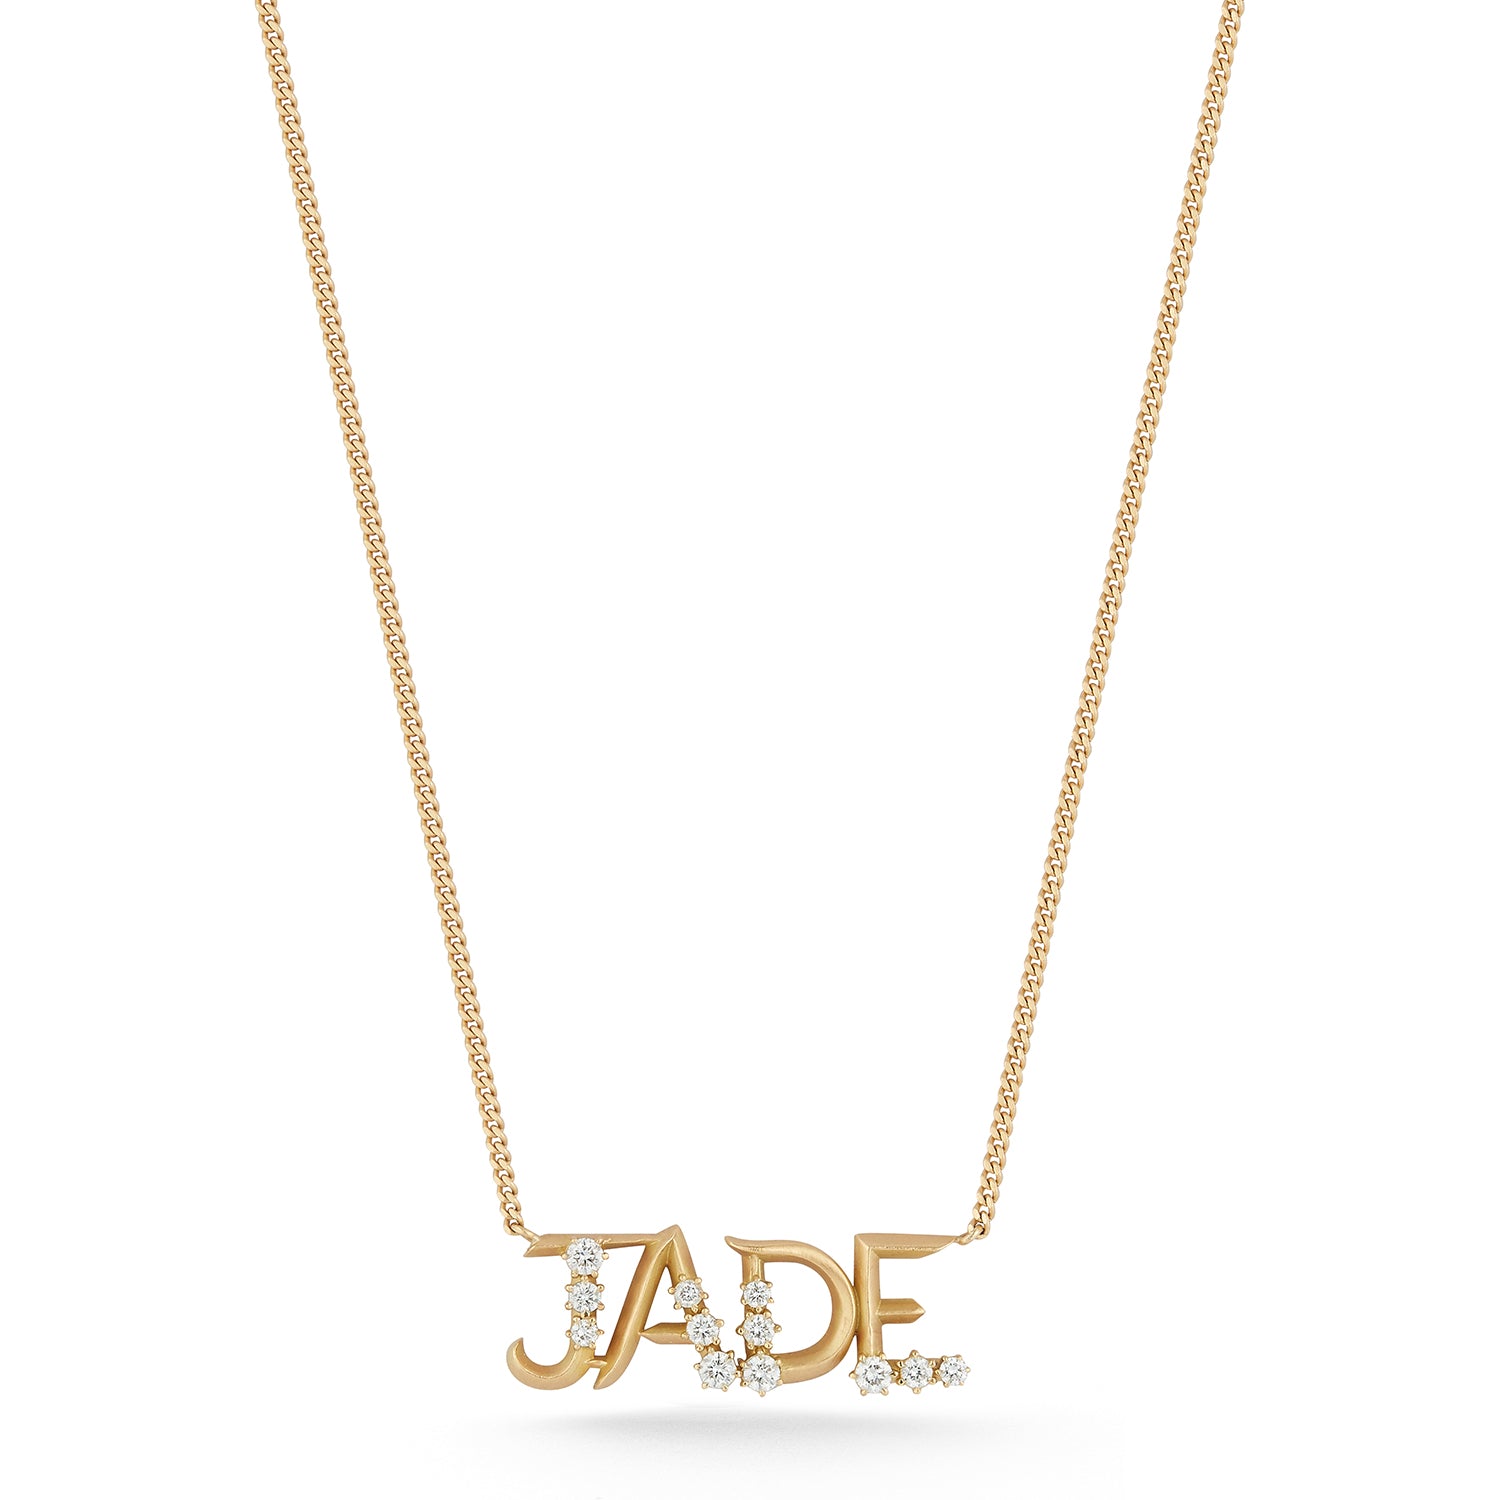 Nameplate Necklace in 18K Yellow Gold